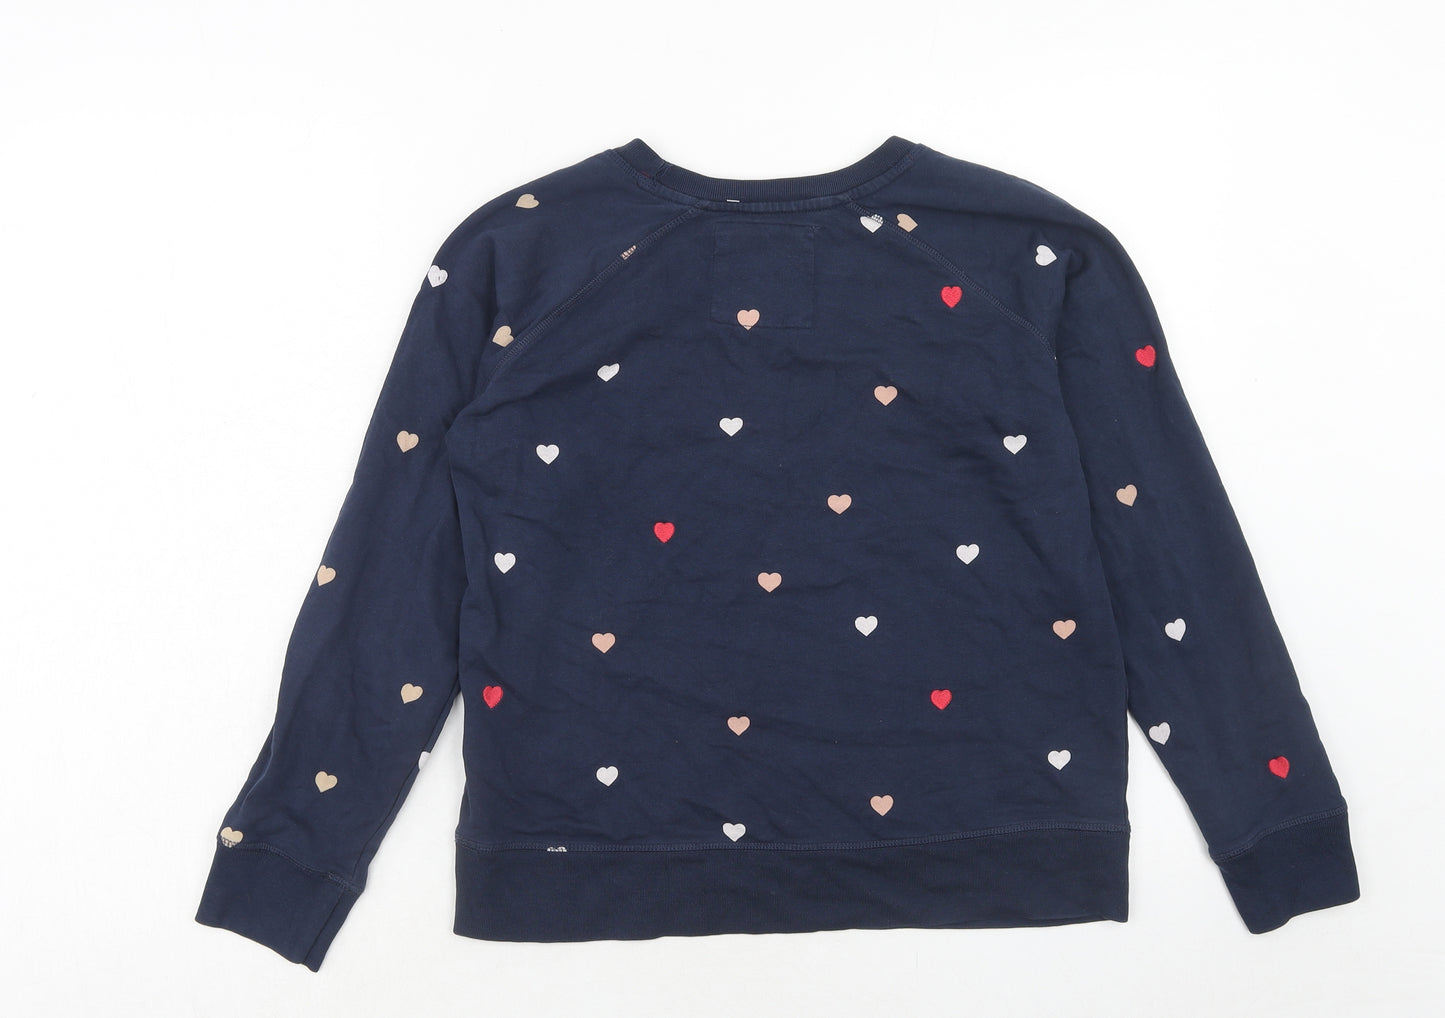 Crew Clothing Womens Blue Geometric Cotton Pullover Sweatshirt Size 10 Pullover - Heart Pattern